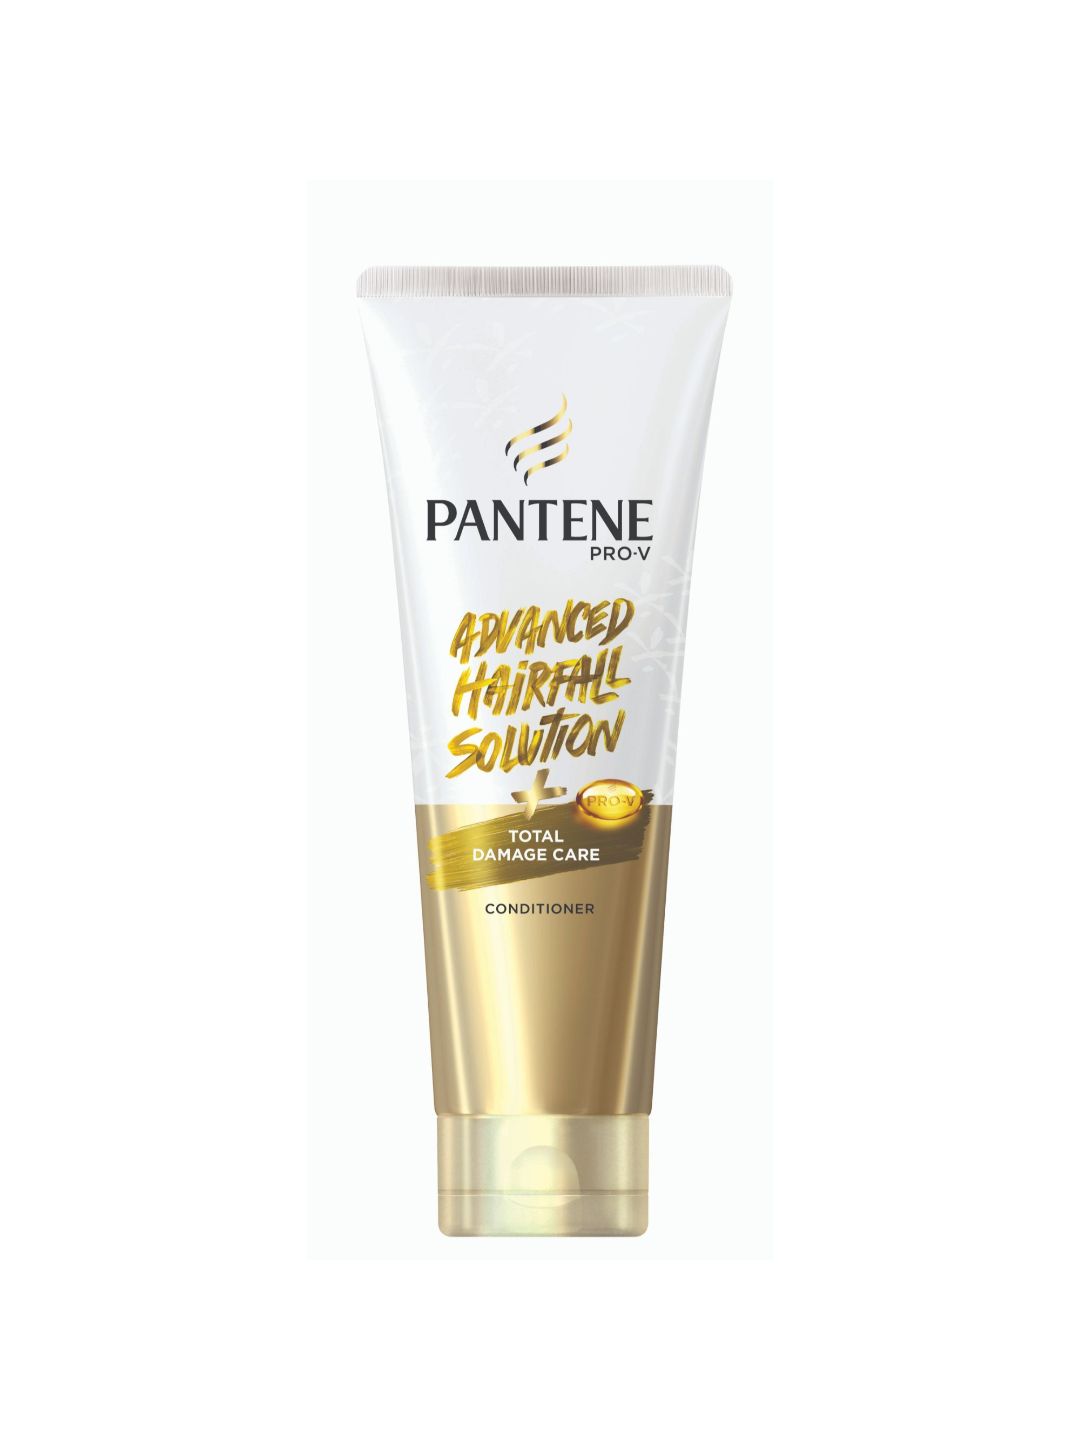 Pantene Advanced Hair Fall Solution Total Damage Care Conditioner, 180 ml